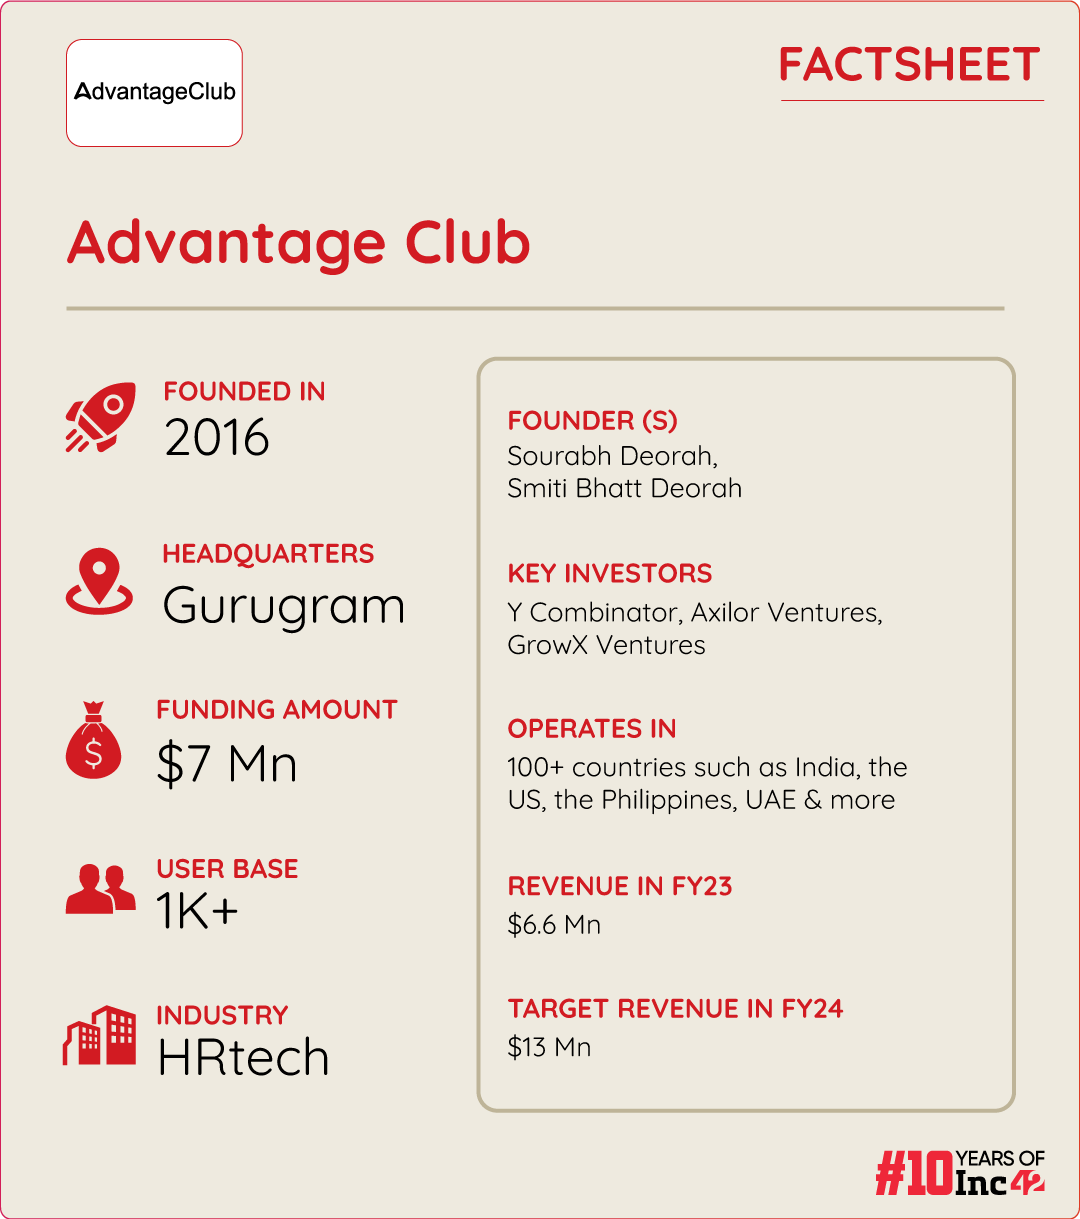 How Advantage Club Is Helping Businesses Create Employee Value Beyond Pay Cheques